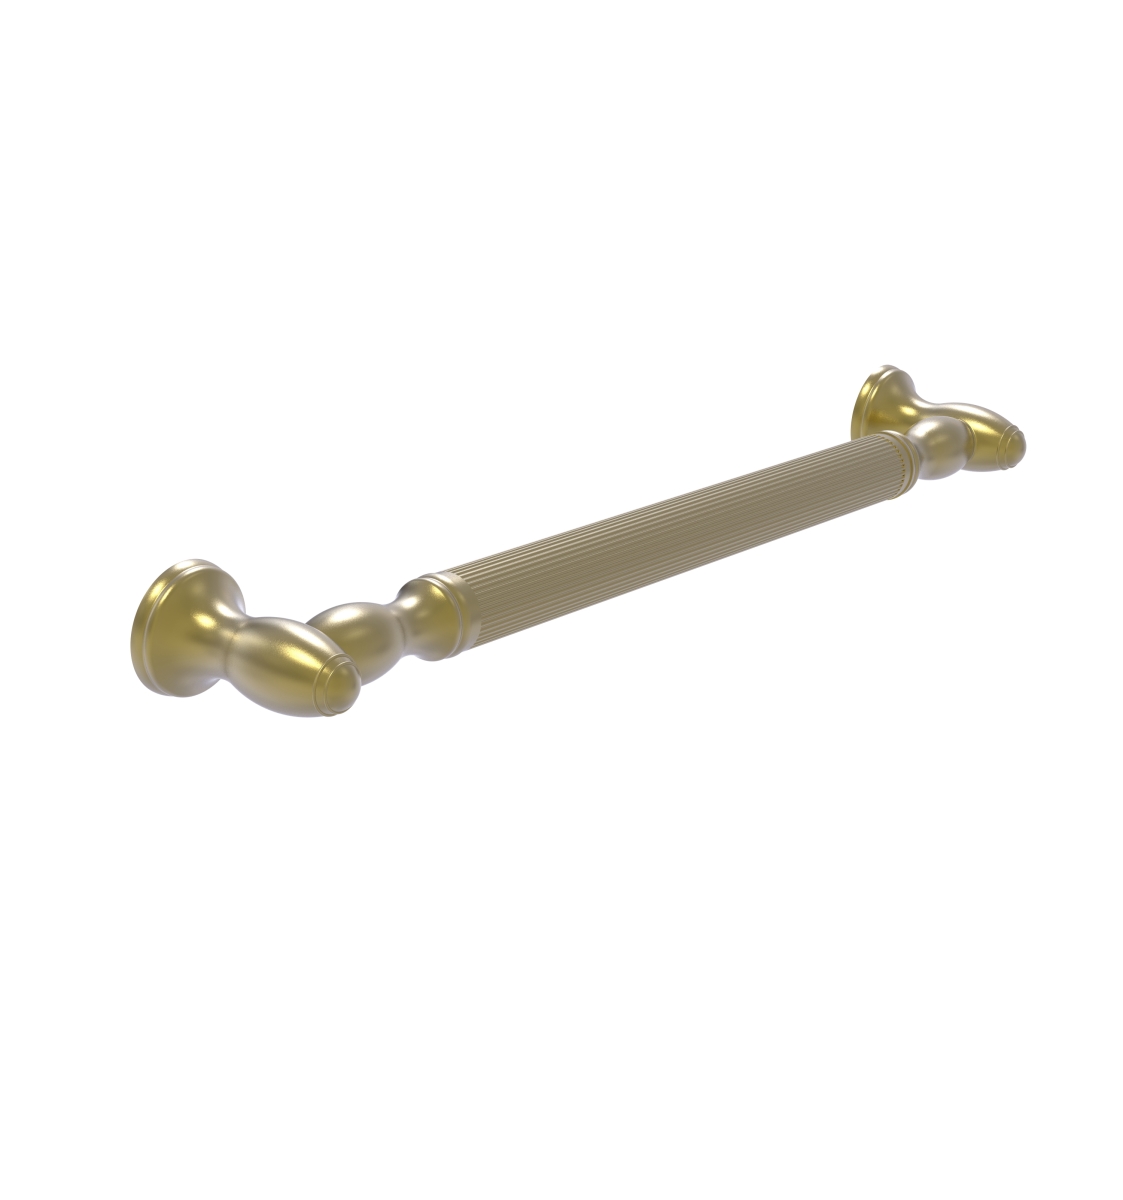 Picture of Allied Brass TD-GRS-36-SBR 36 in. Grab Bar Smooth, Satin Brass - 16 x 3.5 x 18 in.